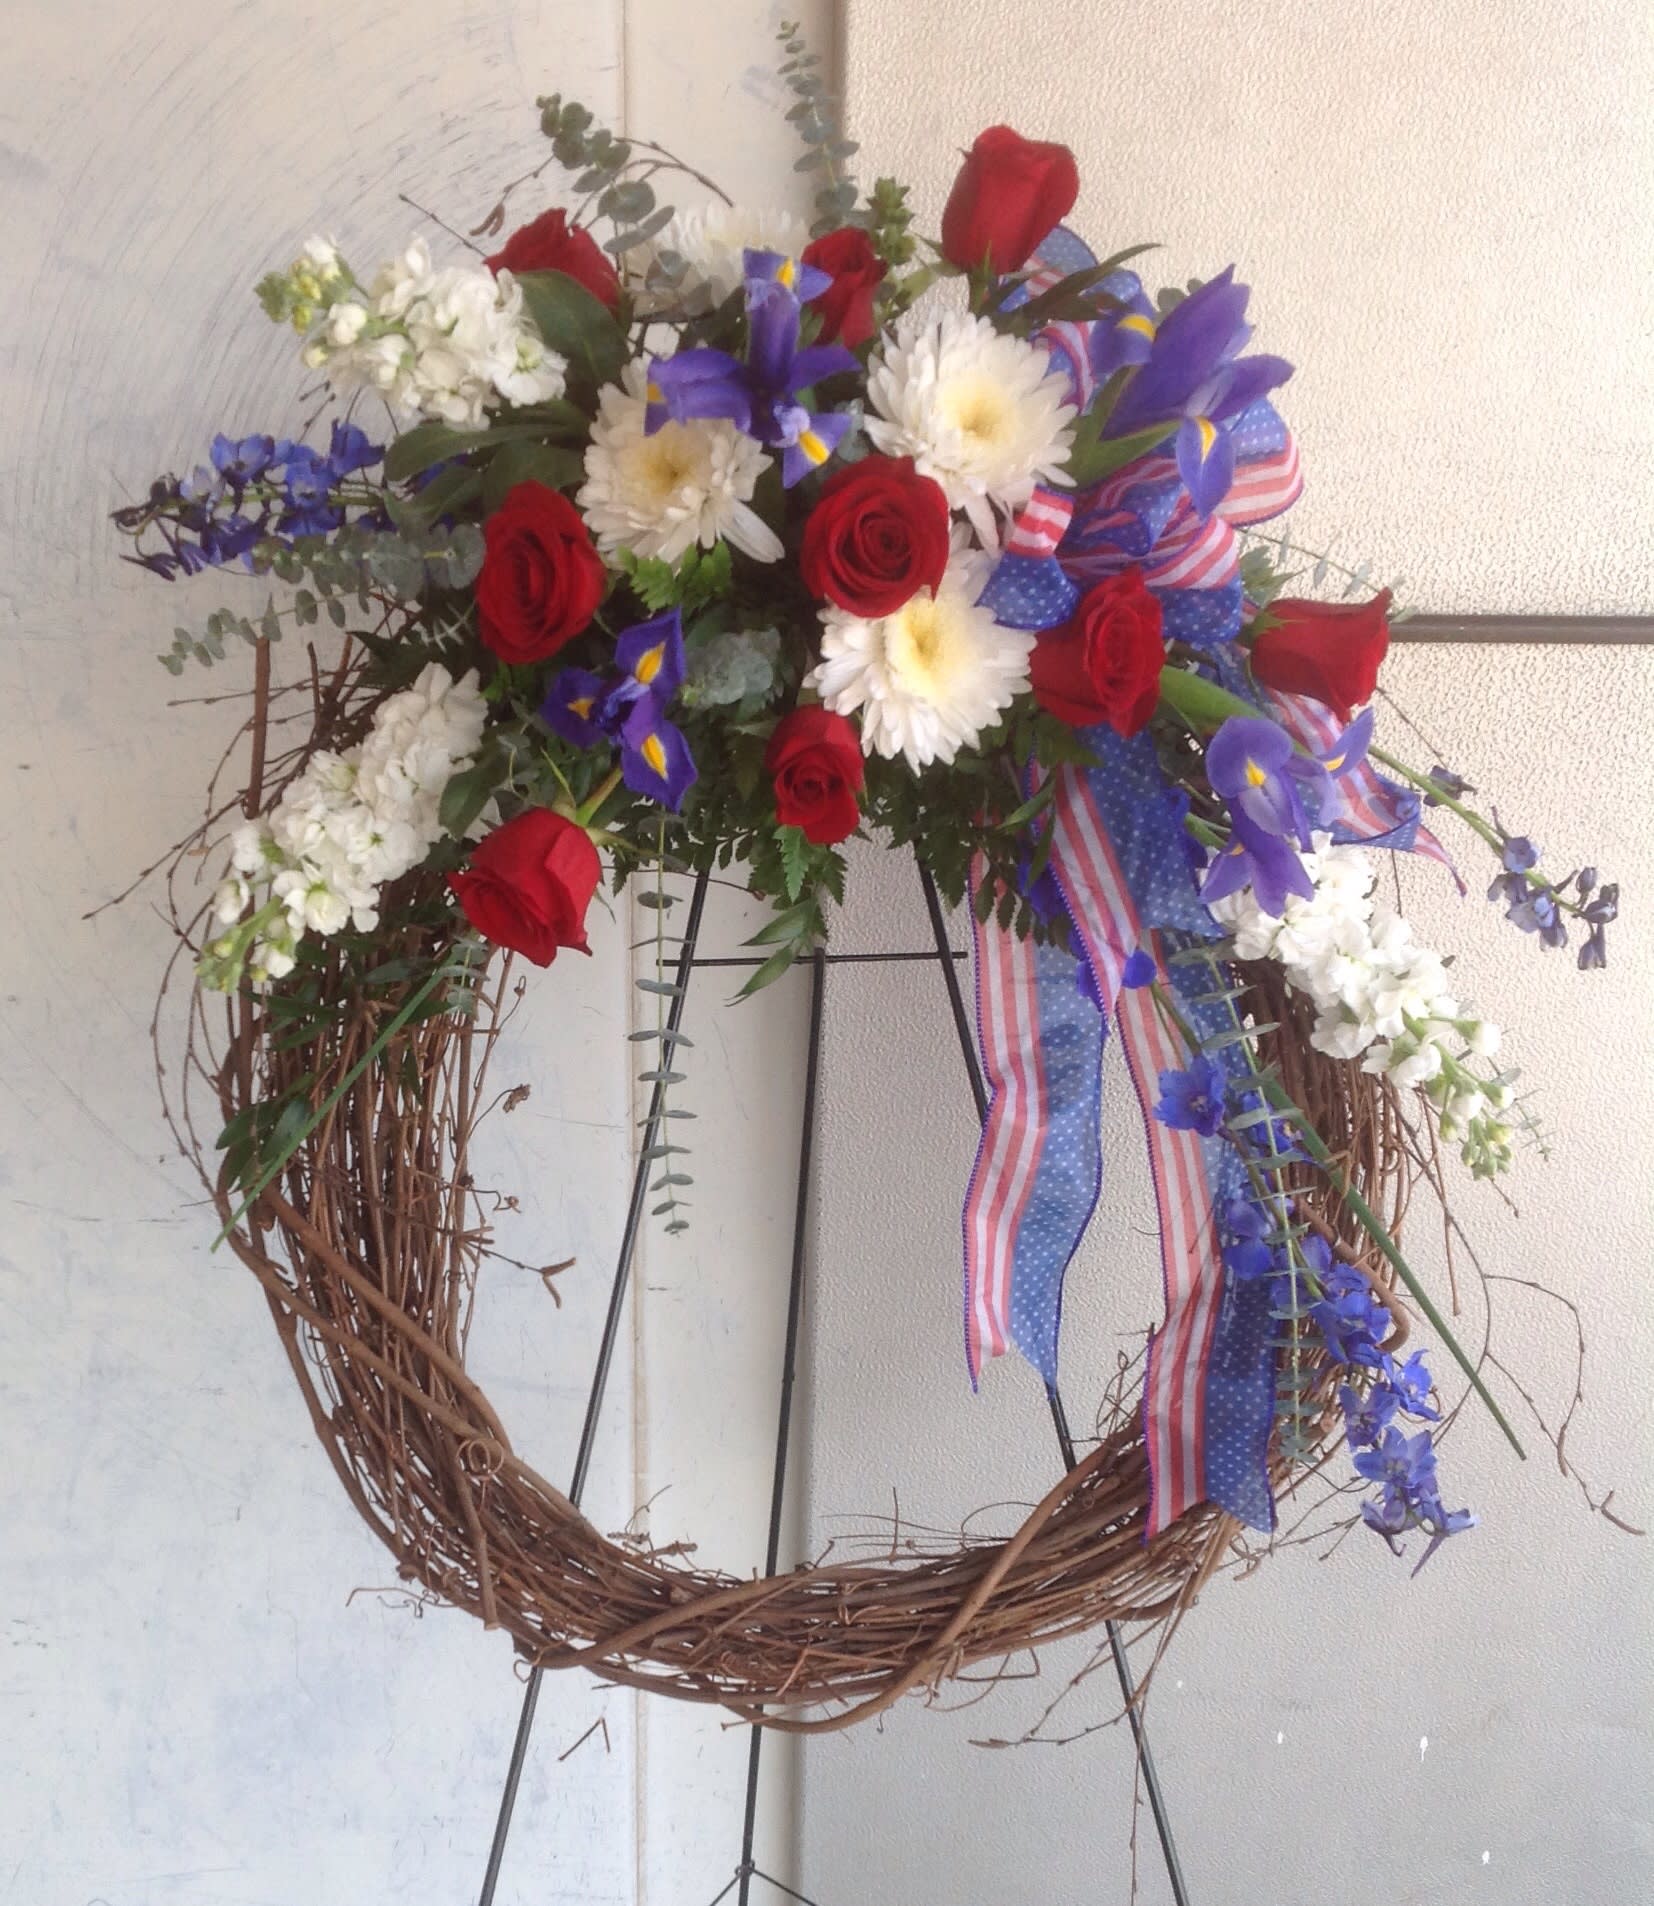 Patriotic Grapevine Wreath - Nice grapevine wreath on an easel designed with red, white &amp; blue flowers. Great for paying tribute to a serviceman or woman. 